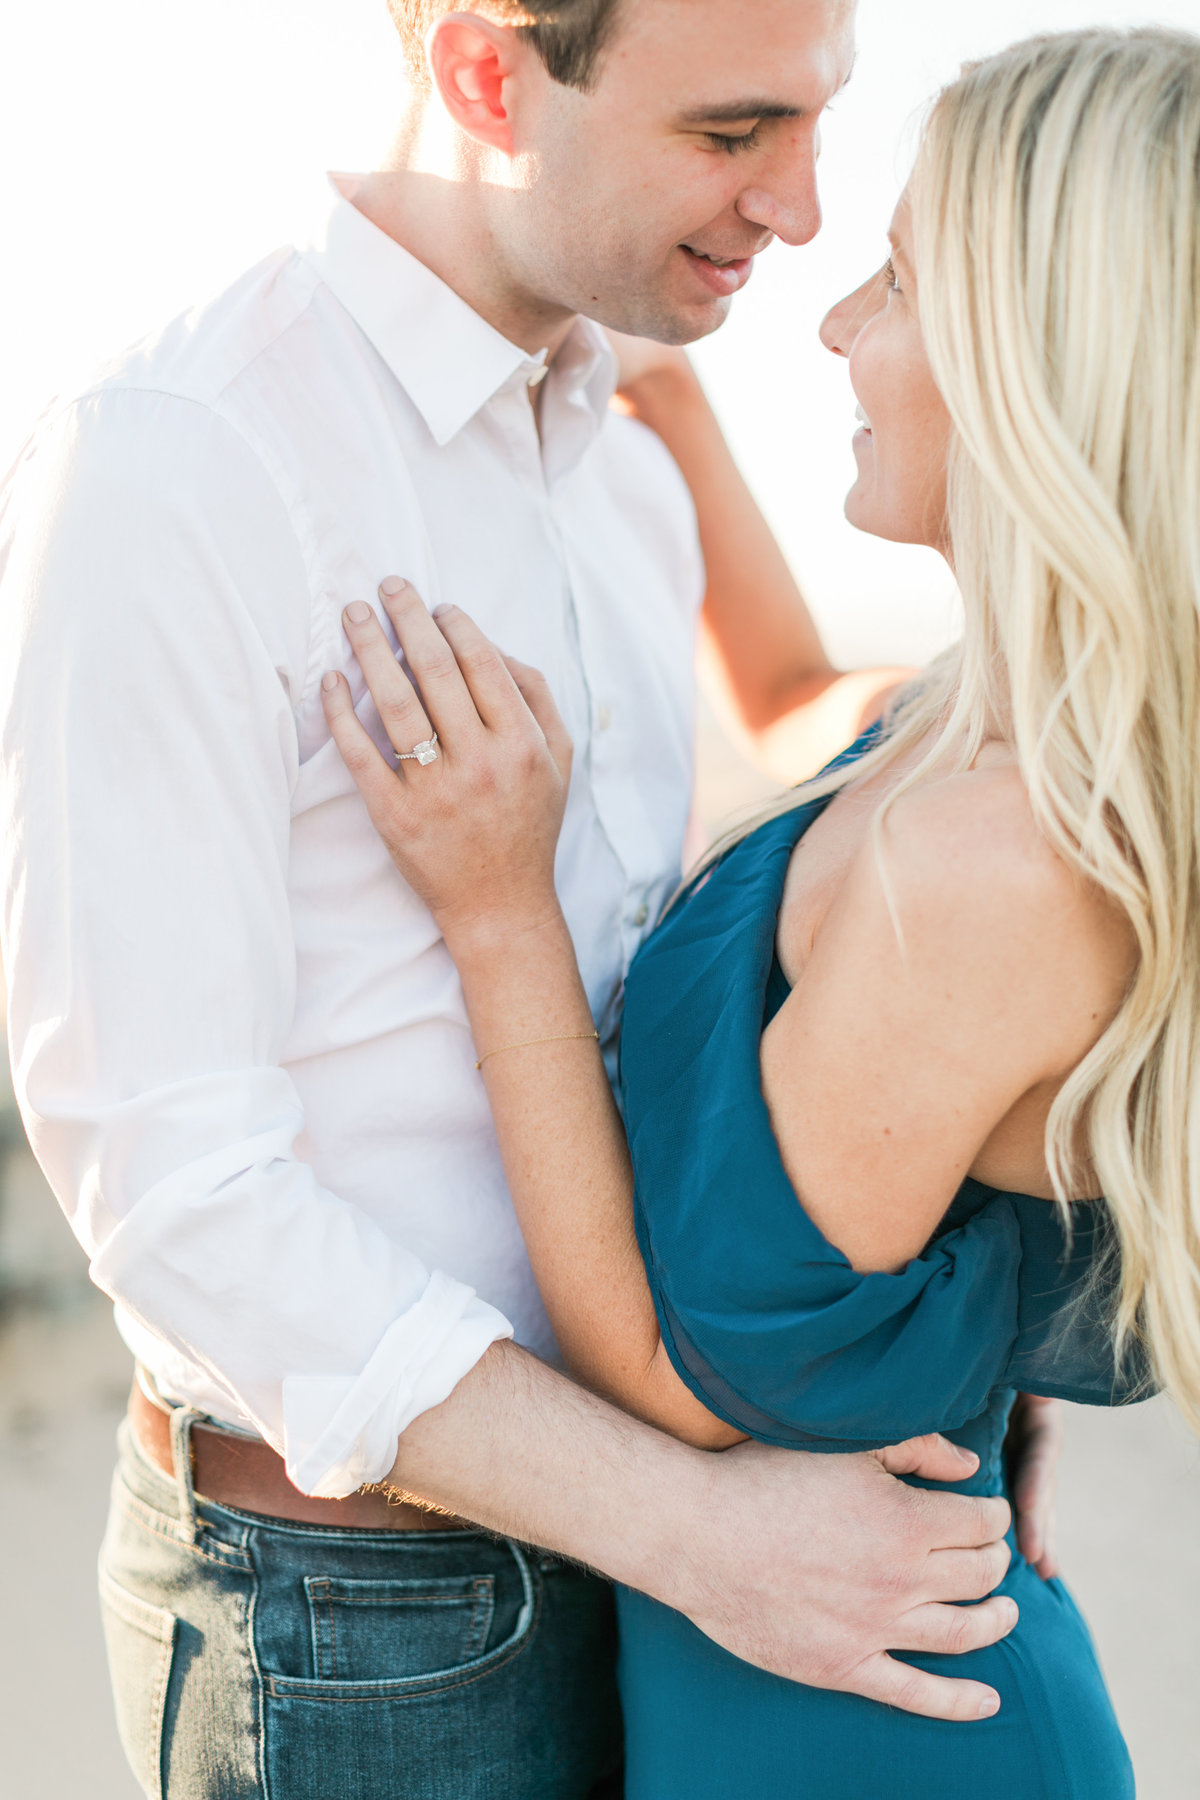 Venice Canal Beach Engagement Session_Valorie Darling Photography-6710